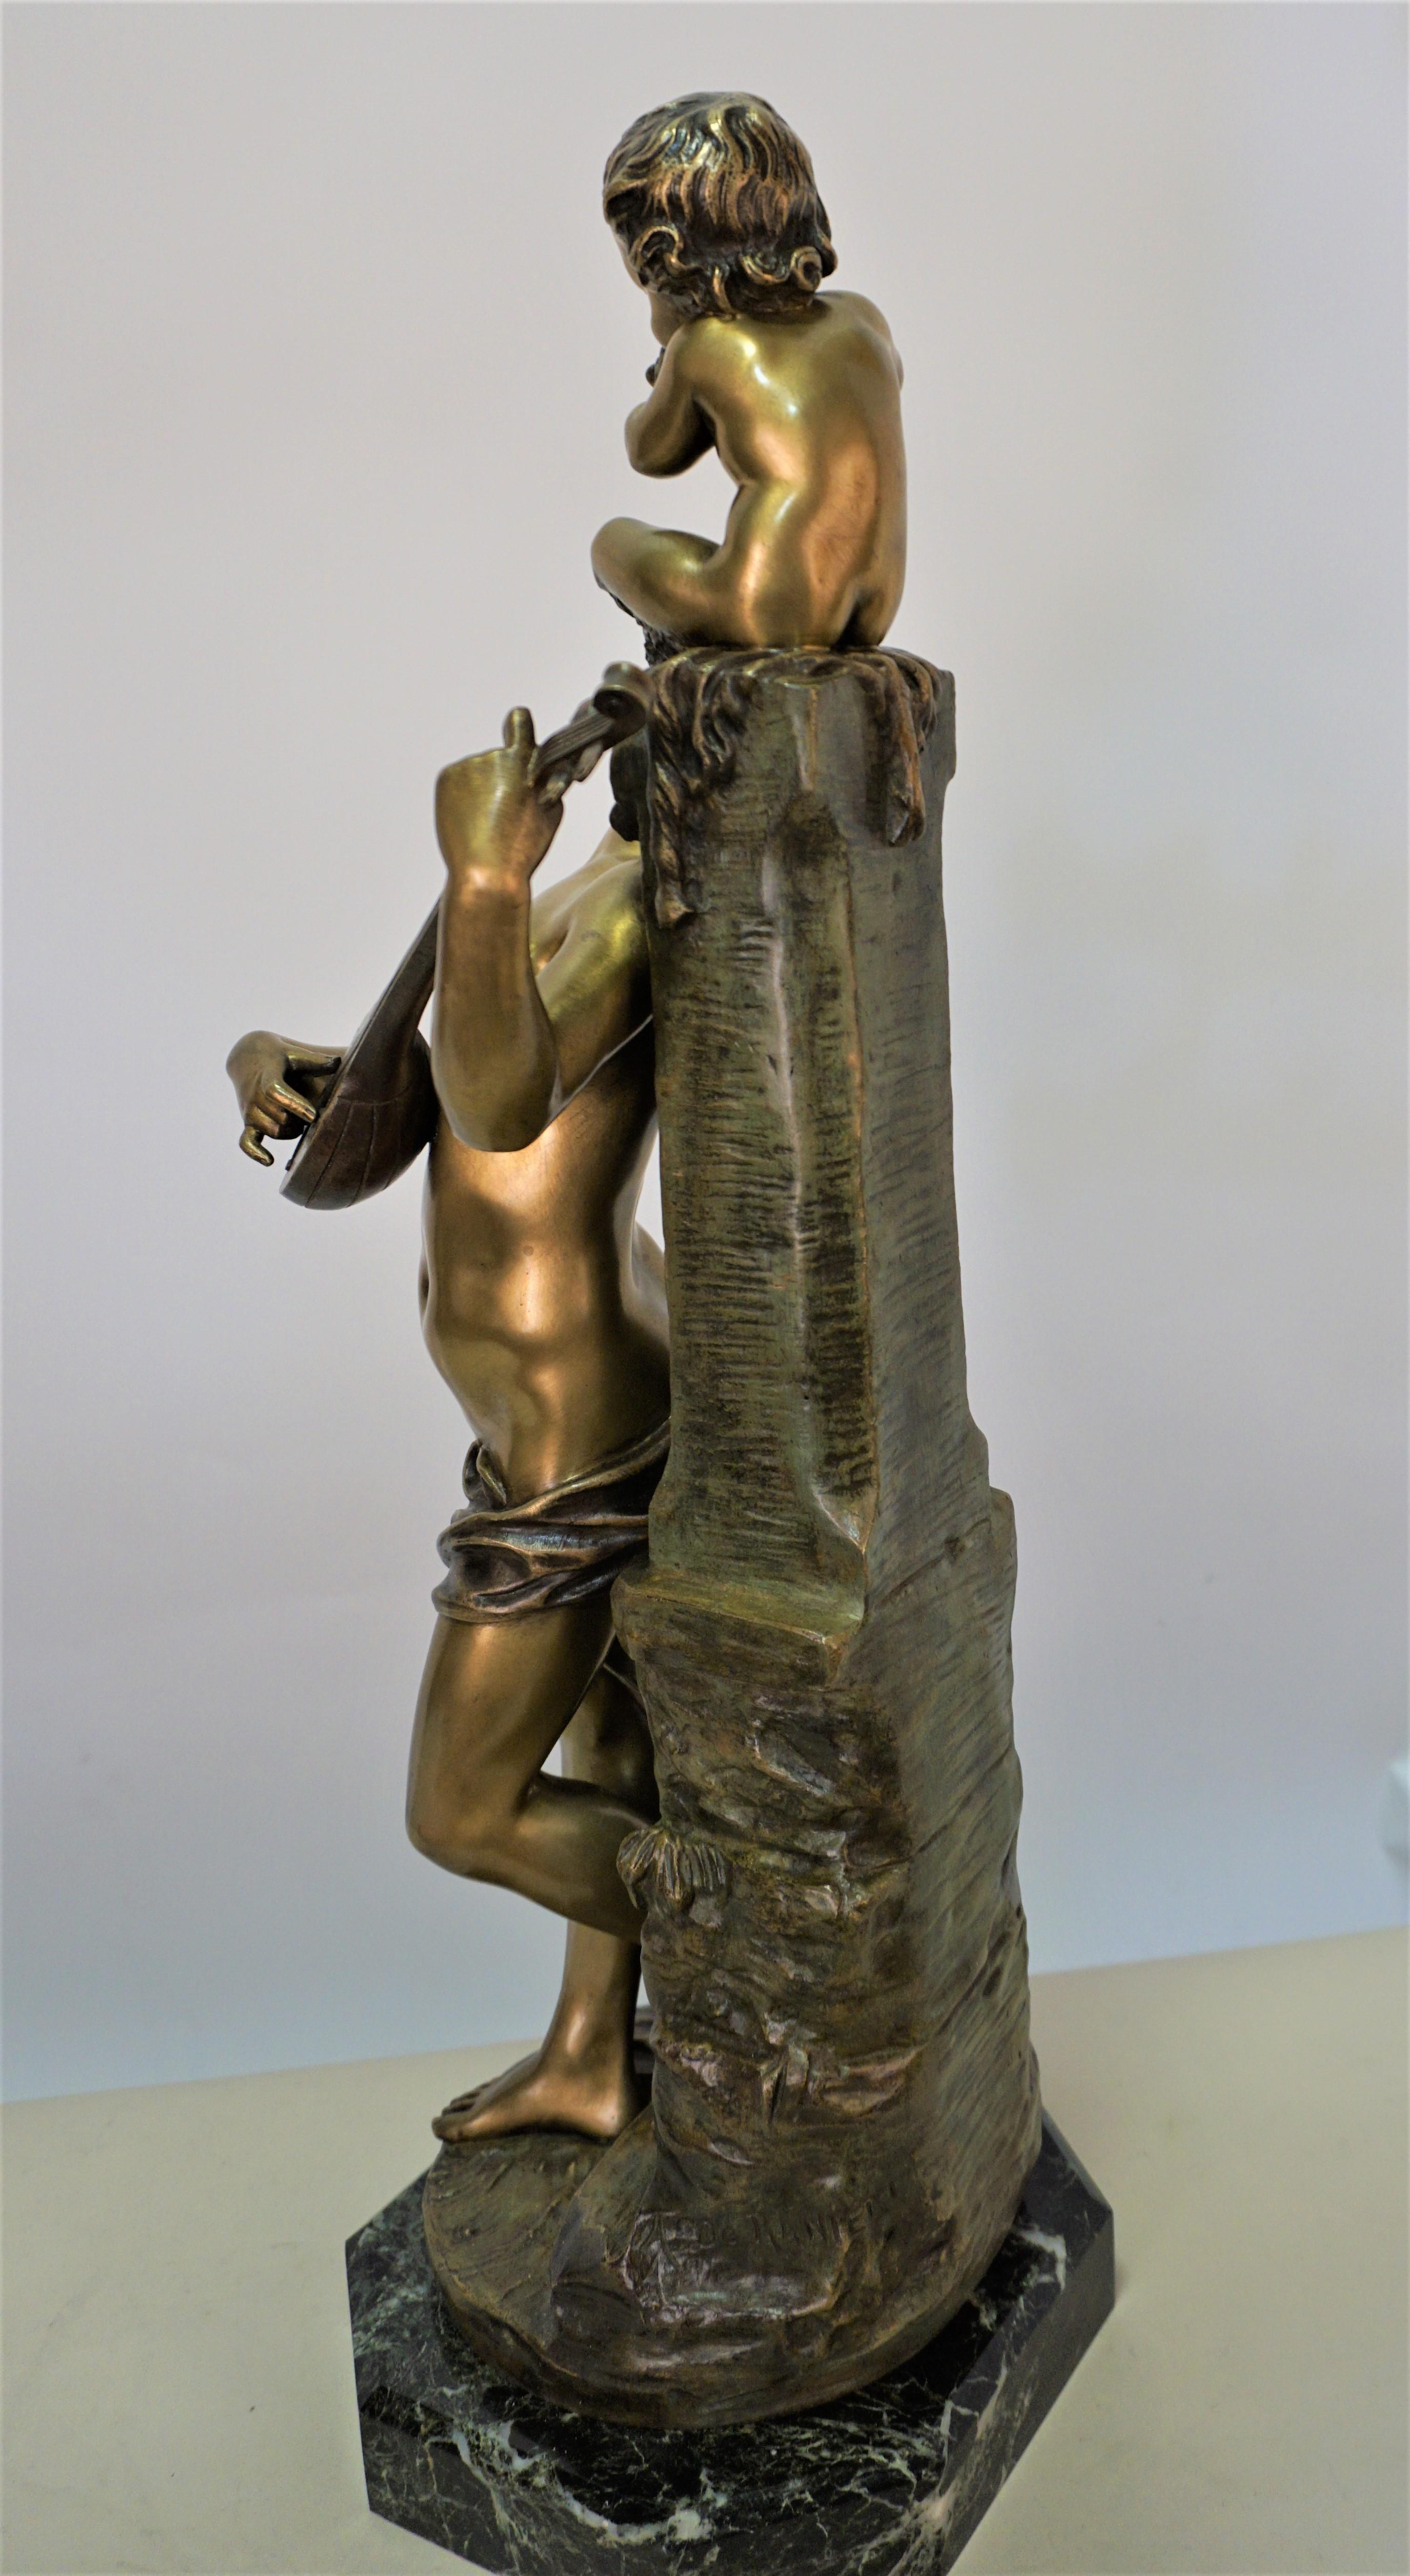 Early 20th Century Bronze Bacchante Plying Music with Young Satyr by Aristide De Ranieri 1865-1929 For Sale